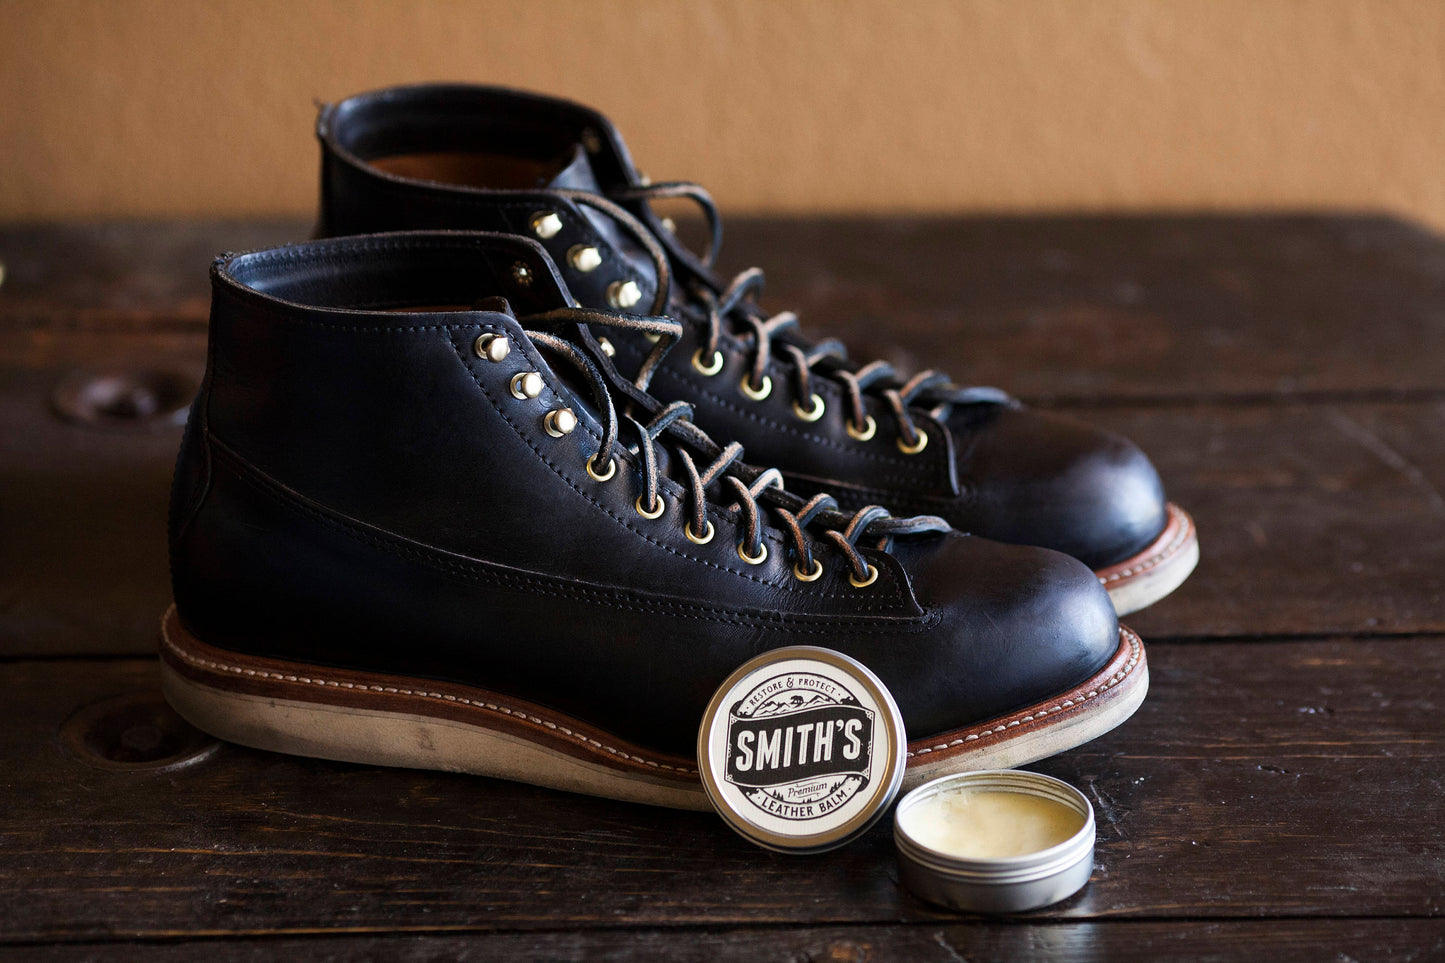 Smith's Leather Balm - Handmade using only three all natural ingredients